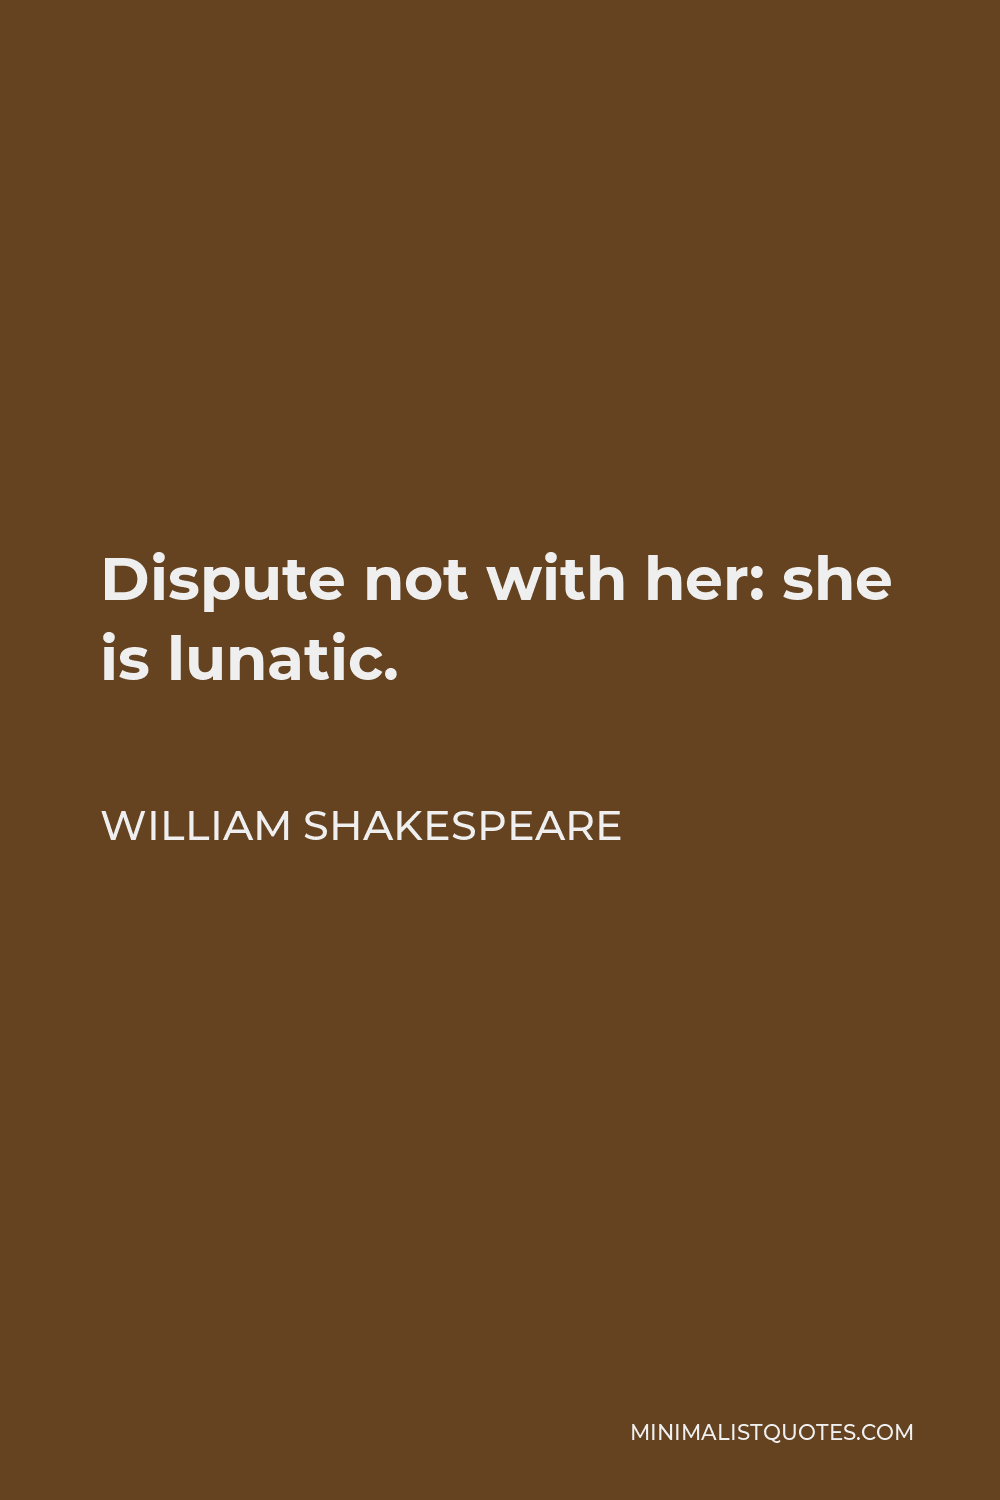 William Shakespeare Quote - Dispute not with her: she is lunatic.